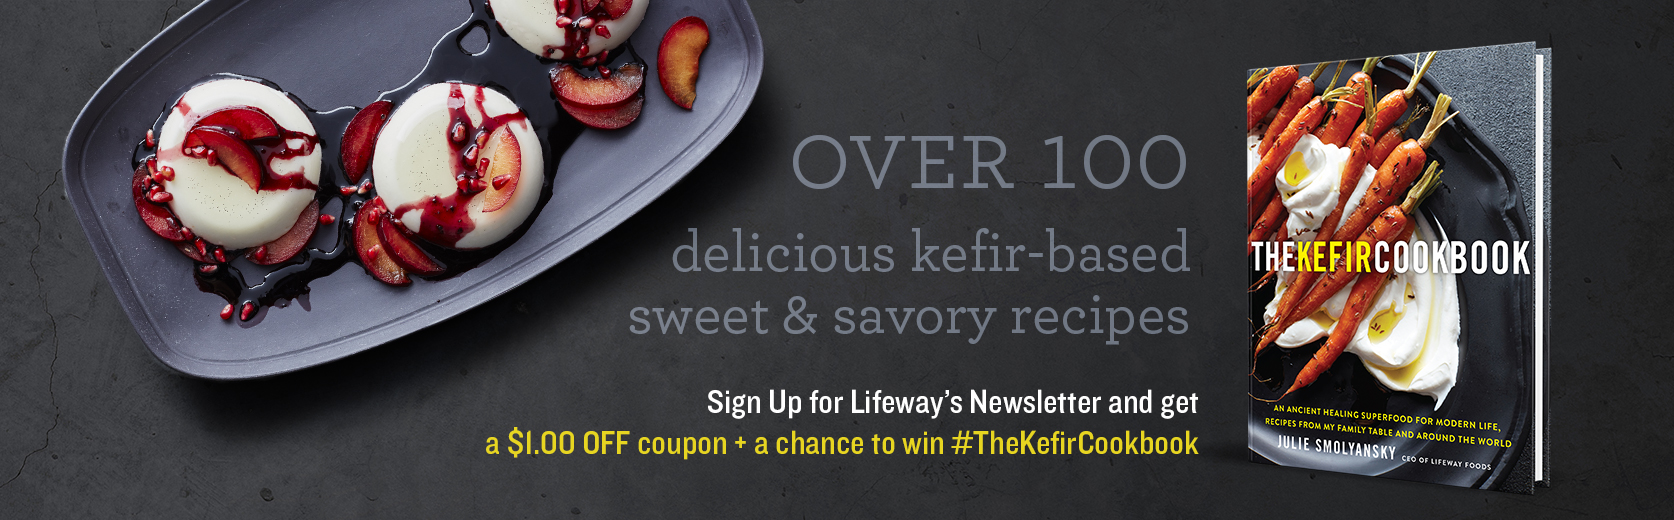 Sign up for Lifeway's Newsletter to get a $1.00 off coupon and be entered to win a copy of The Kefir Cookbook